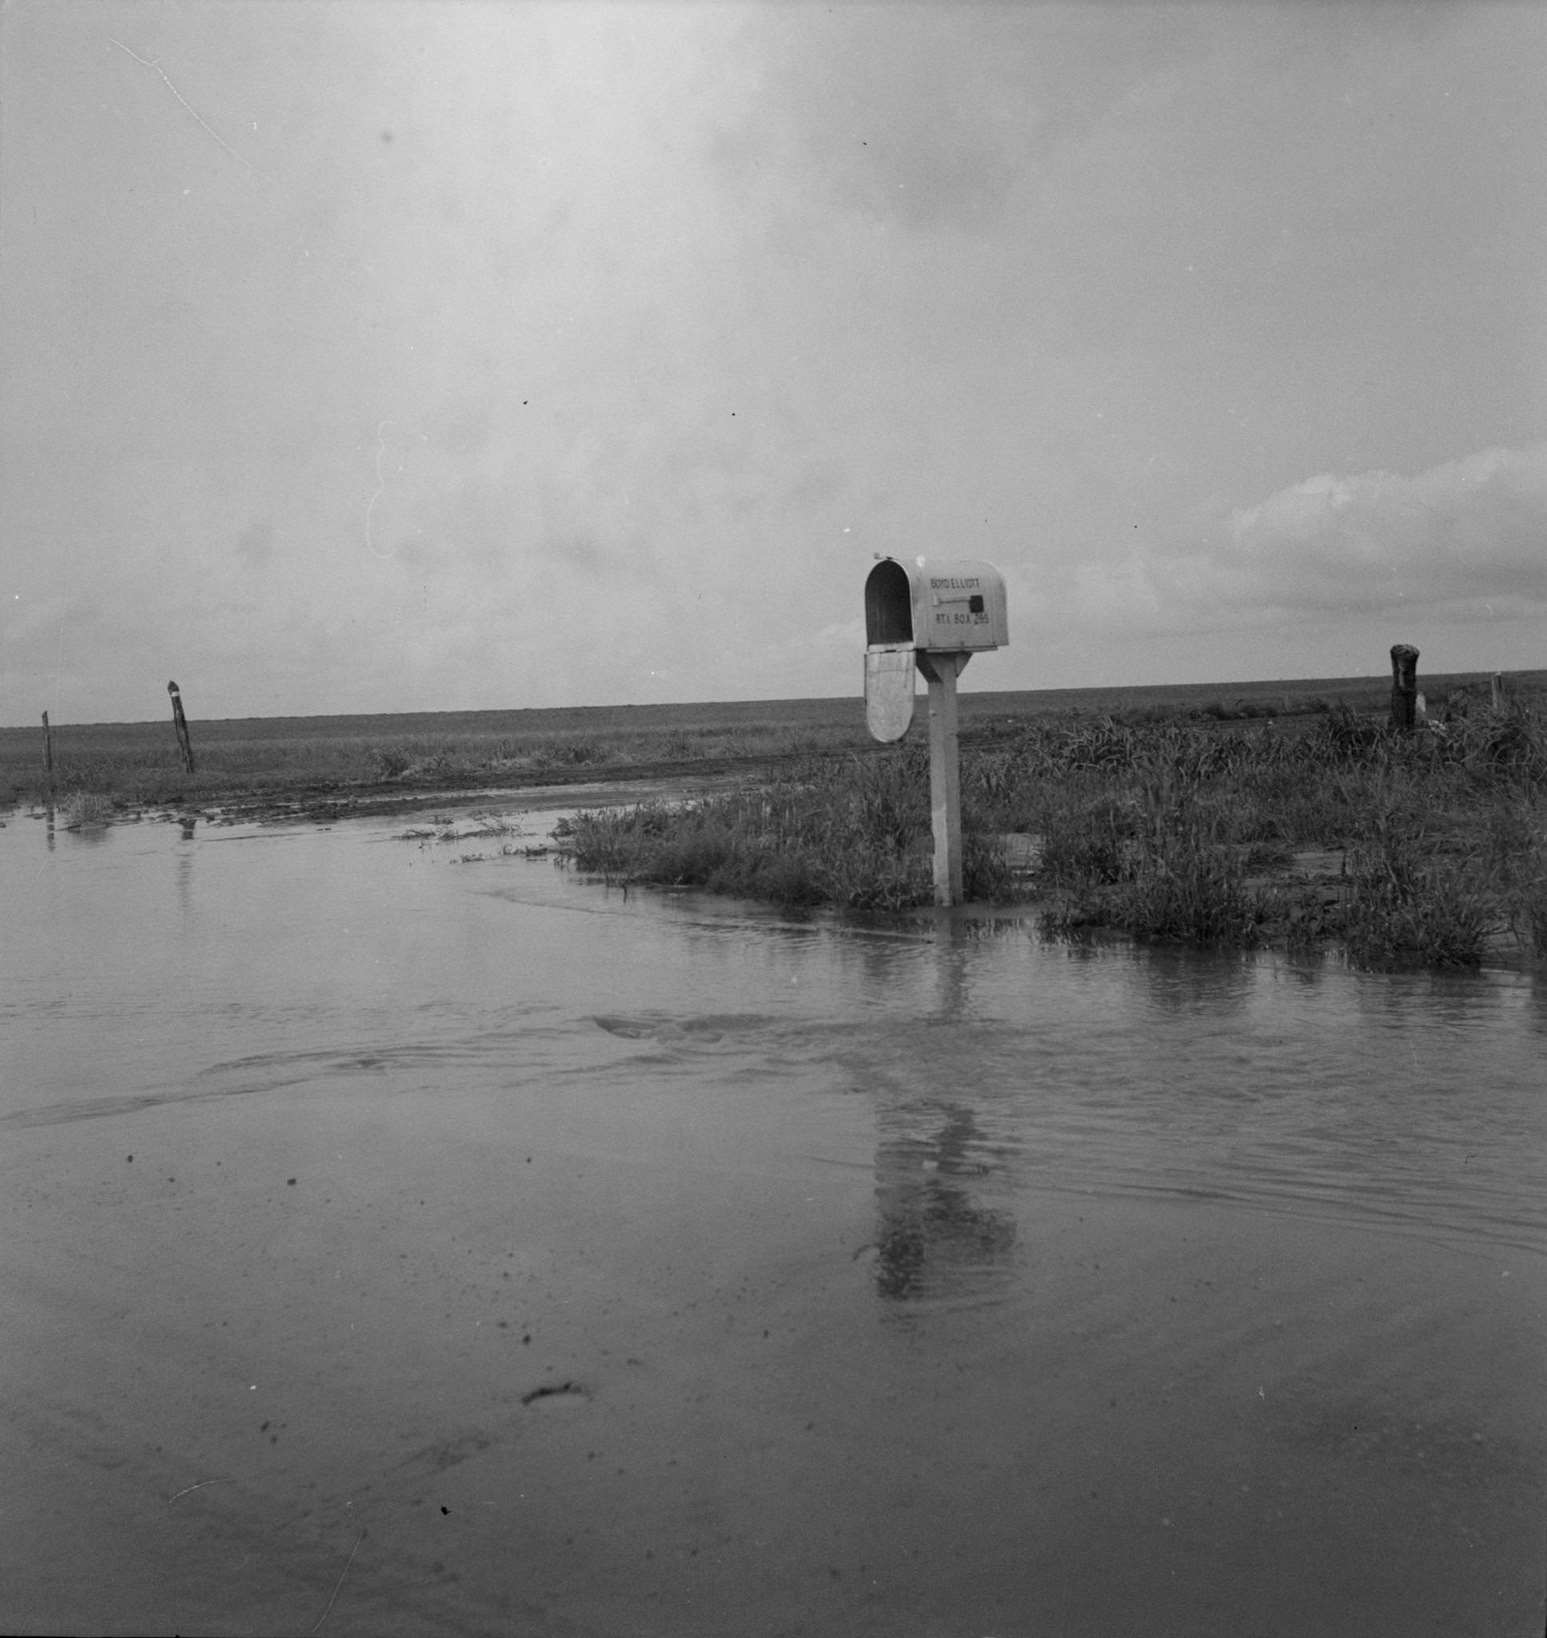 This year (1937) there are floods and heavy rains in the Dust Bowl, 1932